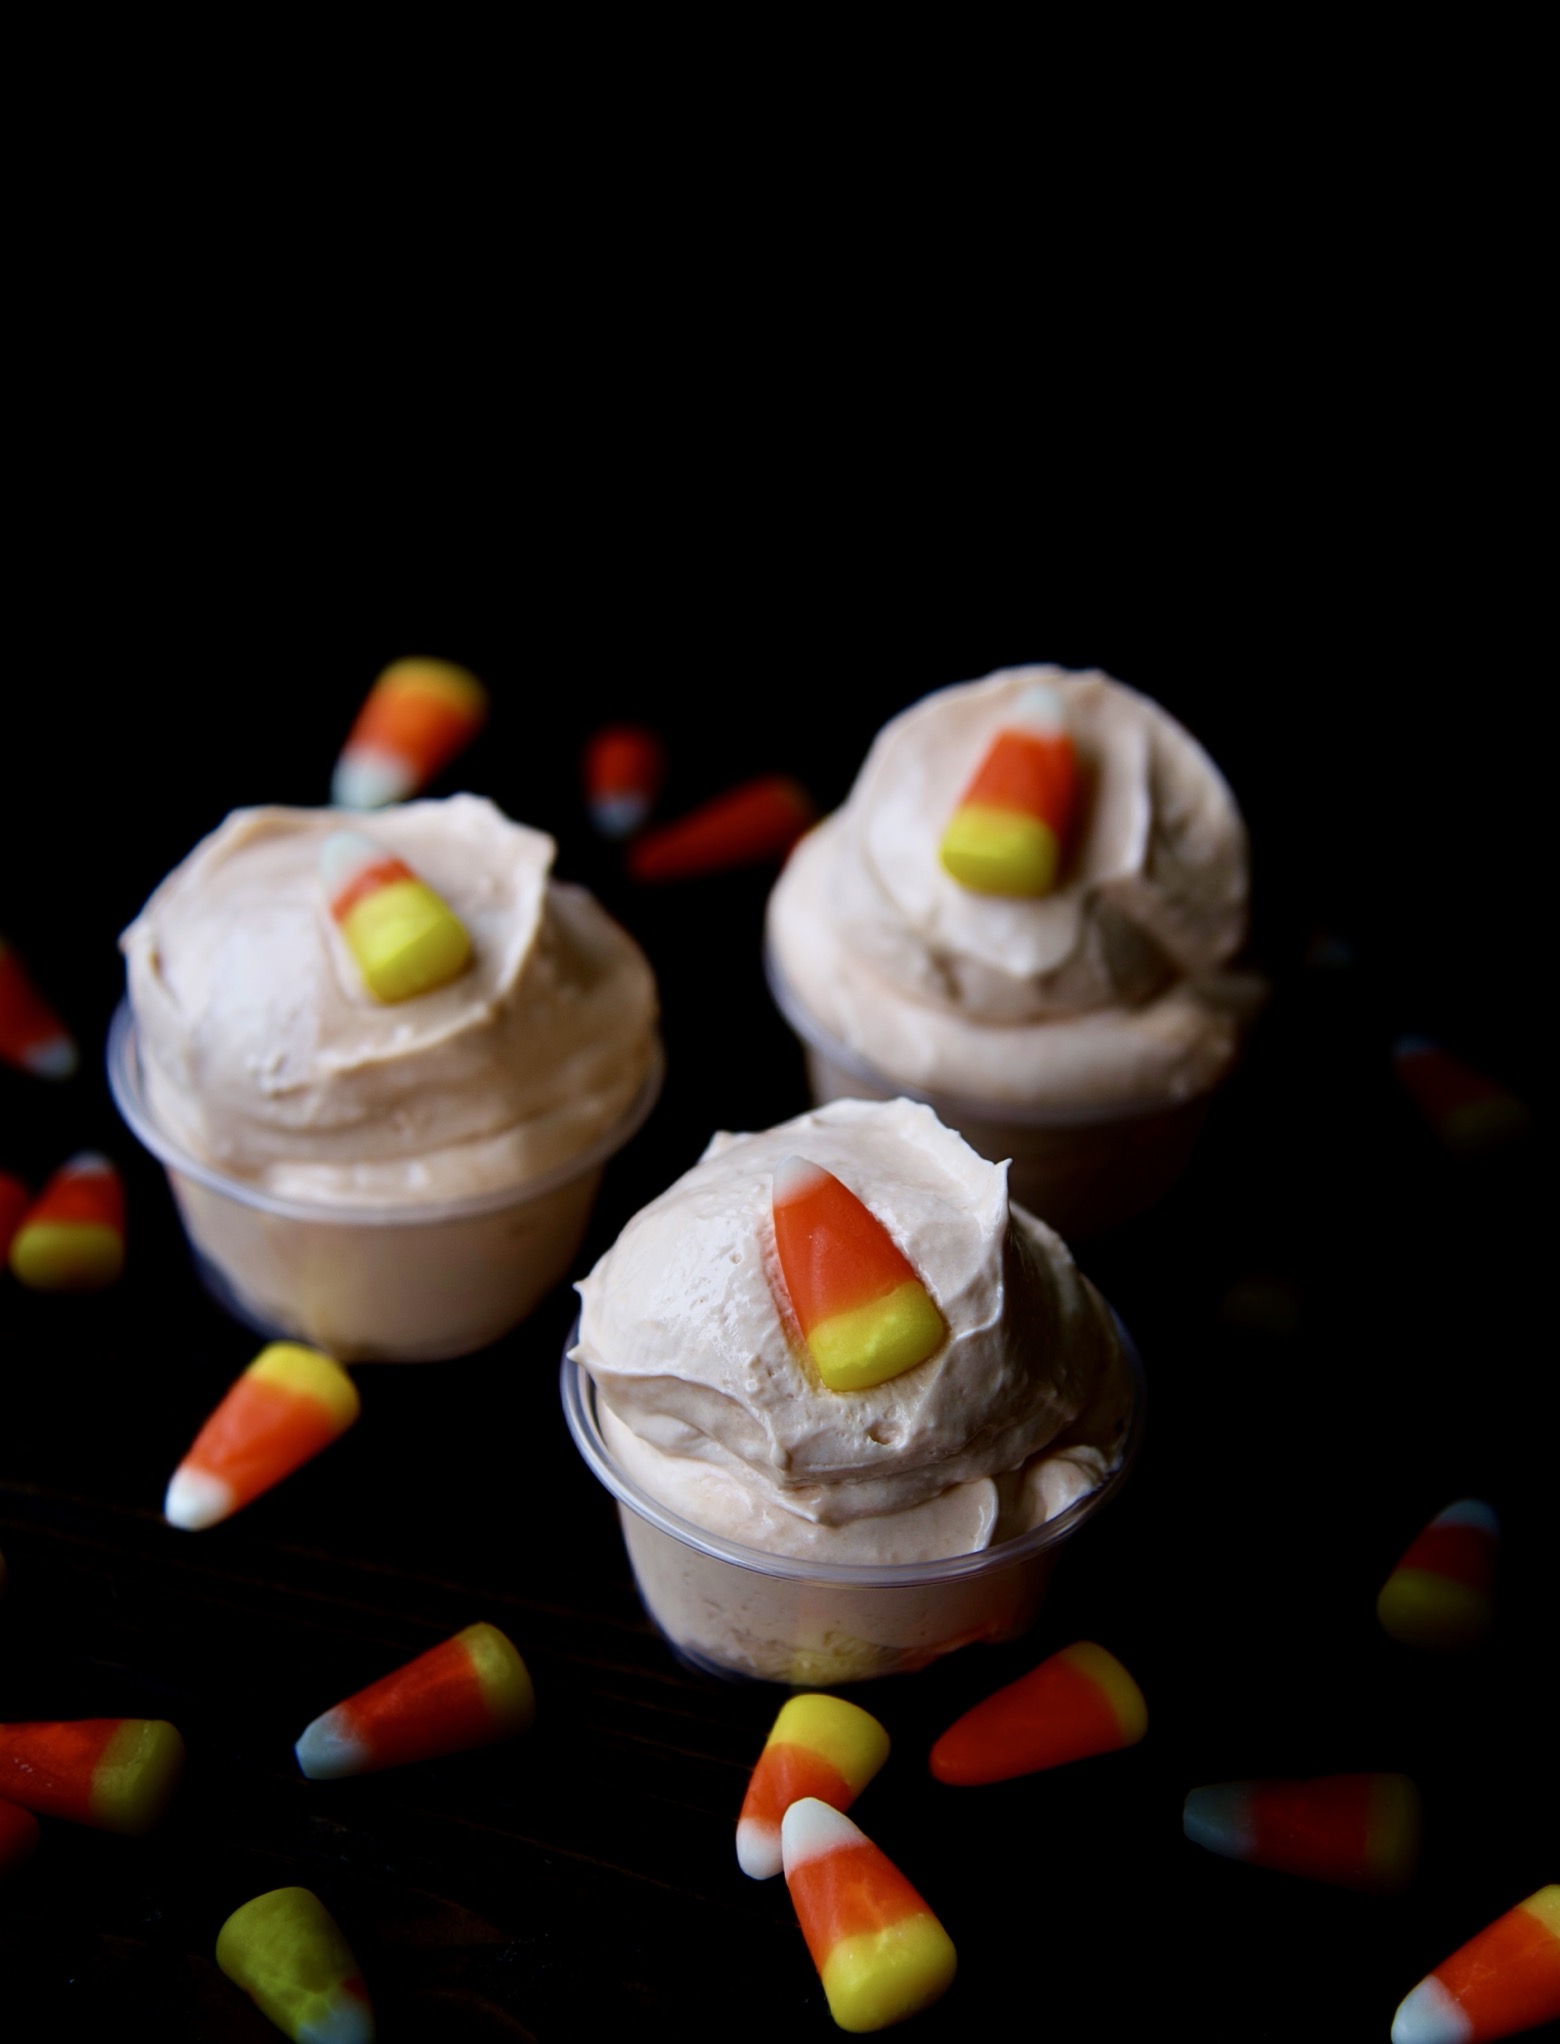 Three quarter view of three pudding shots with a piece of candy corn on each one. With candy corn scattered around. 